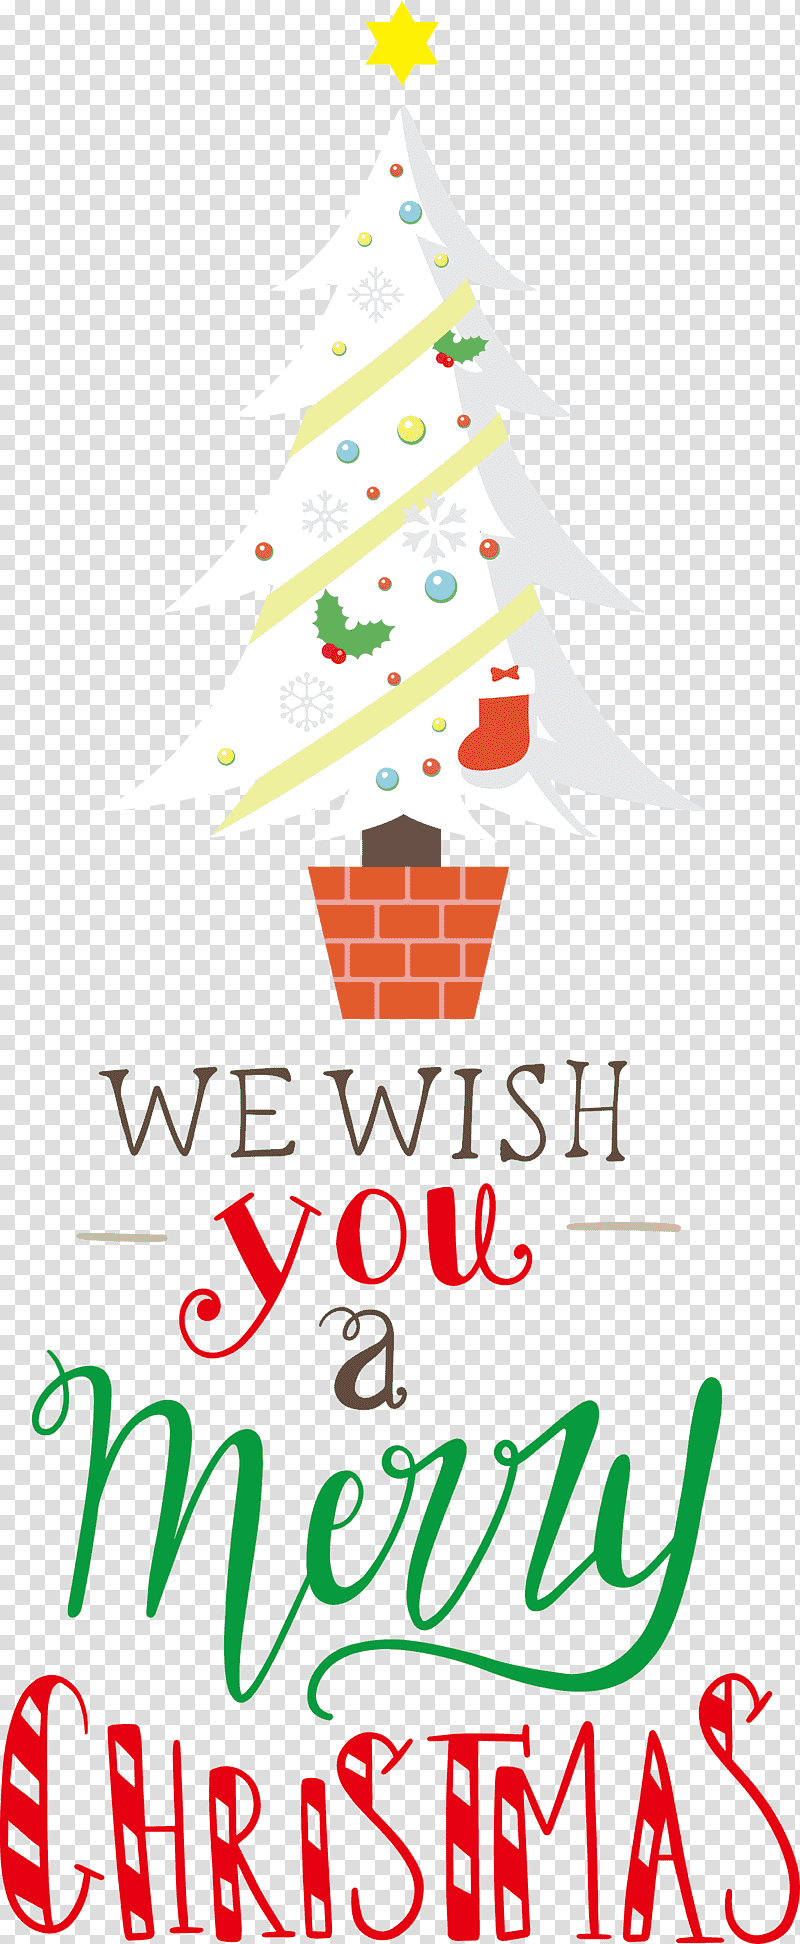 Merry Christmas We Wish You A Merry Christmas, Christmas Tree, Christmas Day, Holiday Ornament, Christmas Ornament, Christmas Ornament M, Gift transparent background PNG clipart